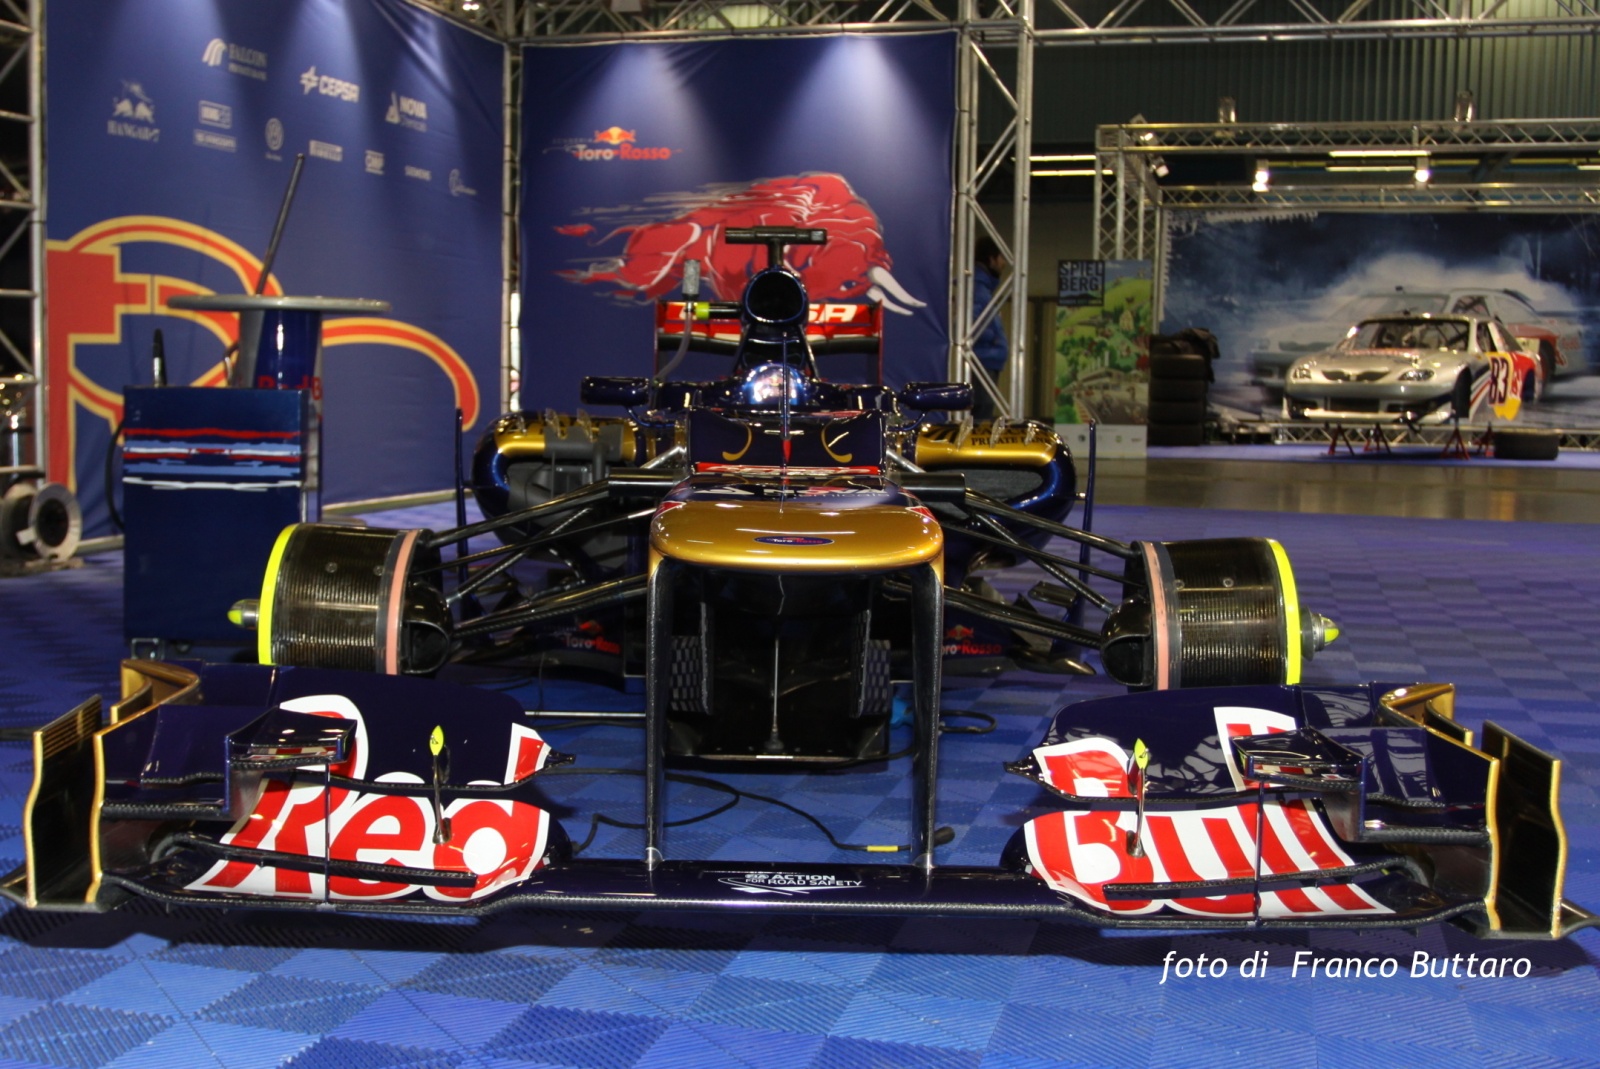 Motor Show 2012 - Red Bull Speed day - Bologna, 8 dicembre 2012